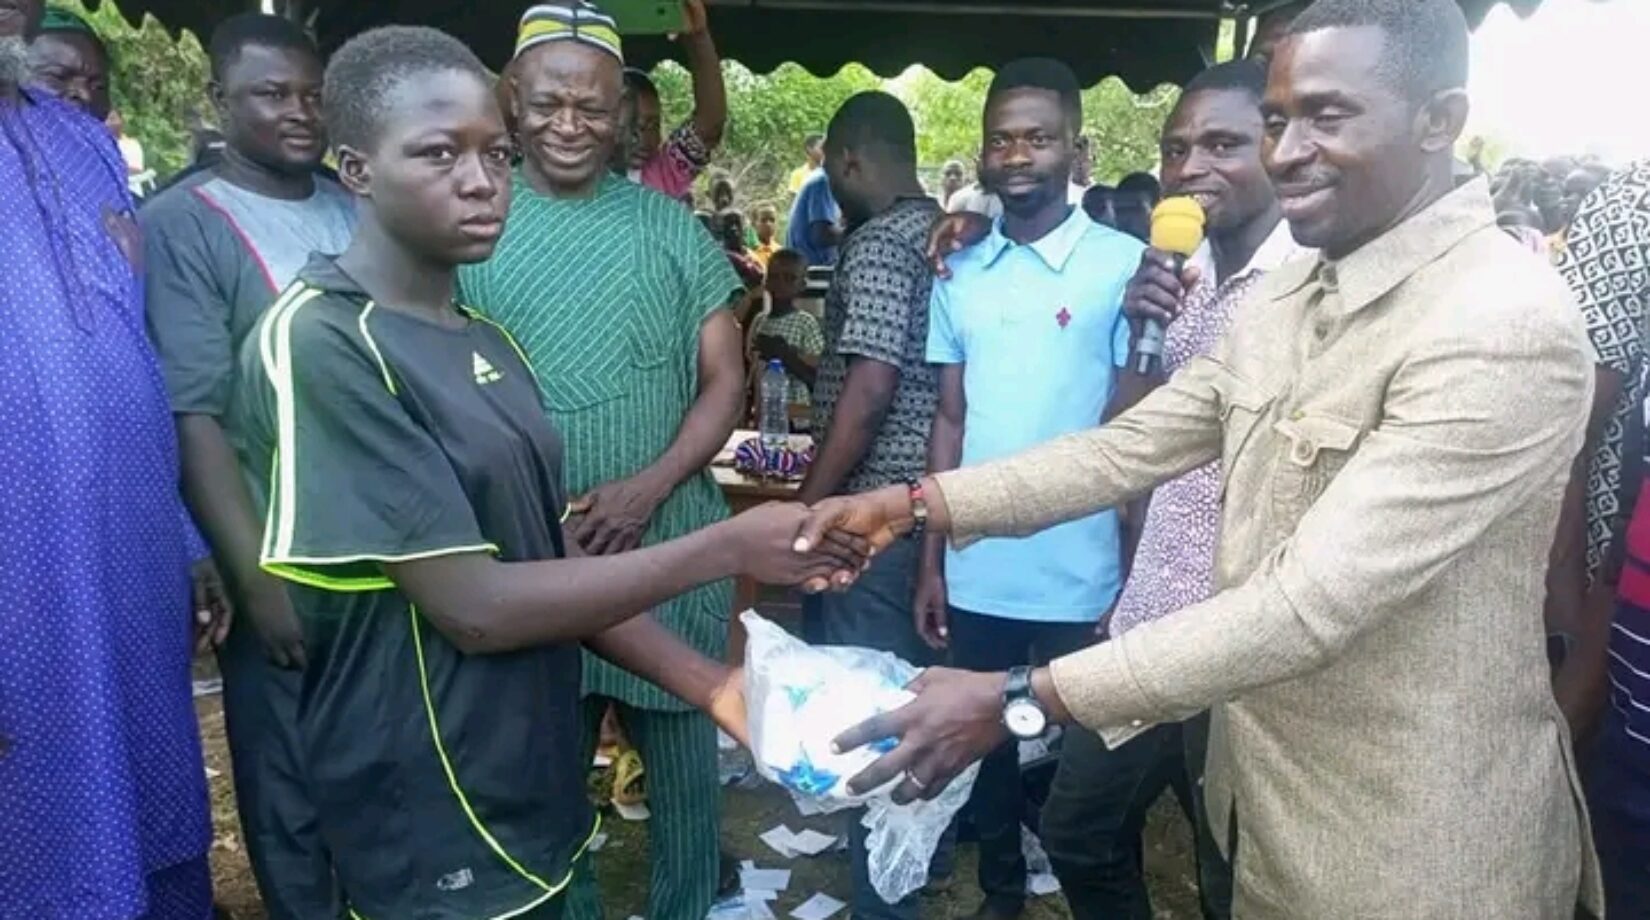 GEORGE AKOM DOES IT AGAIN! Donates sports equipment to Drobonso Dagomba circuit